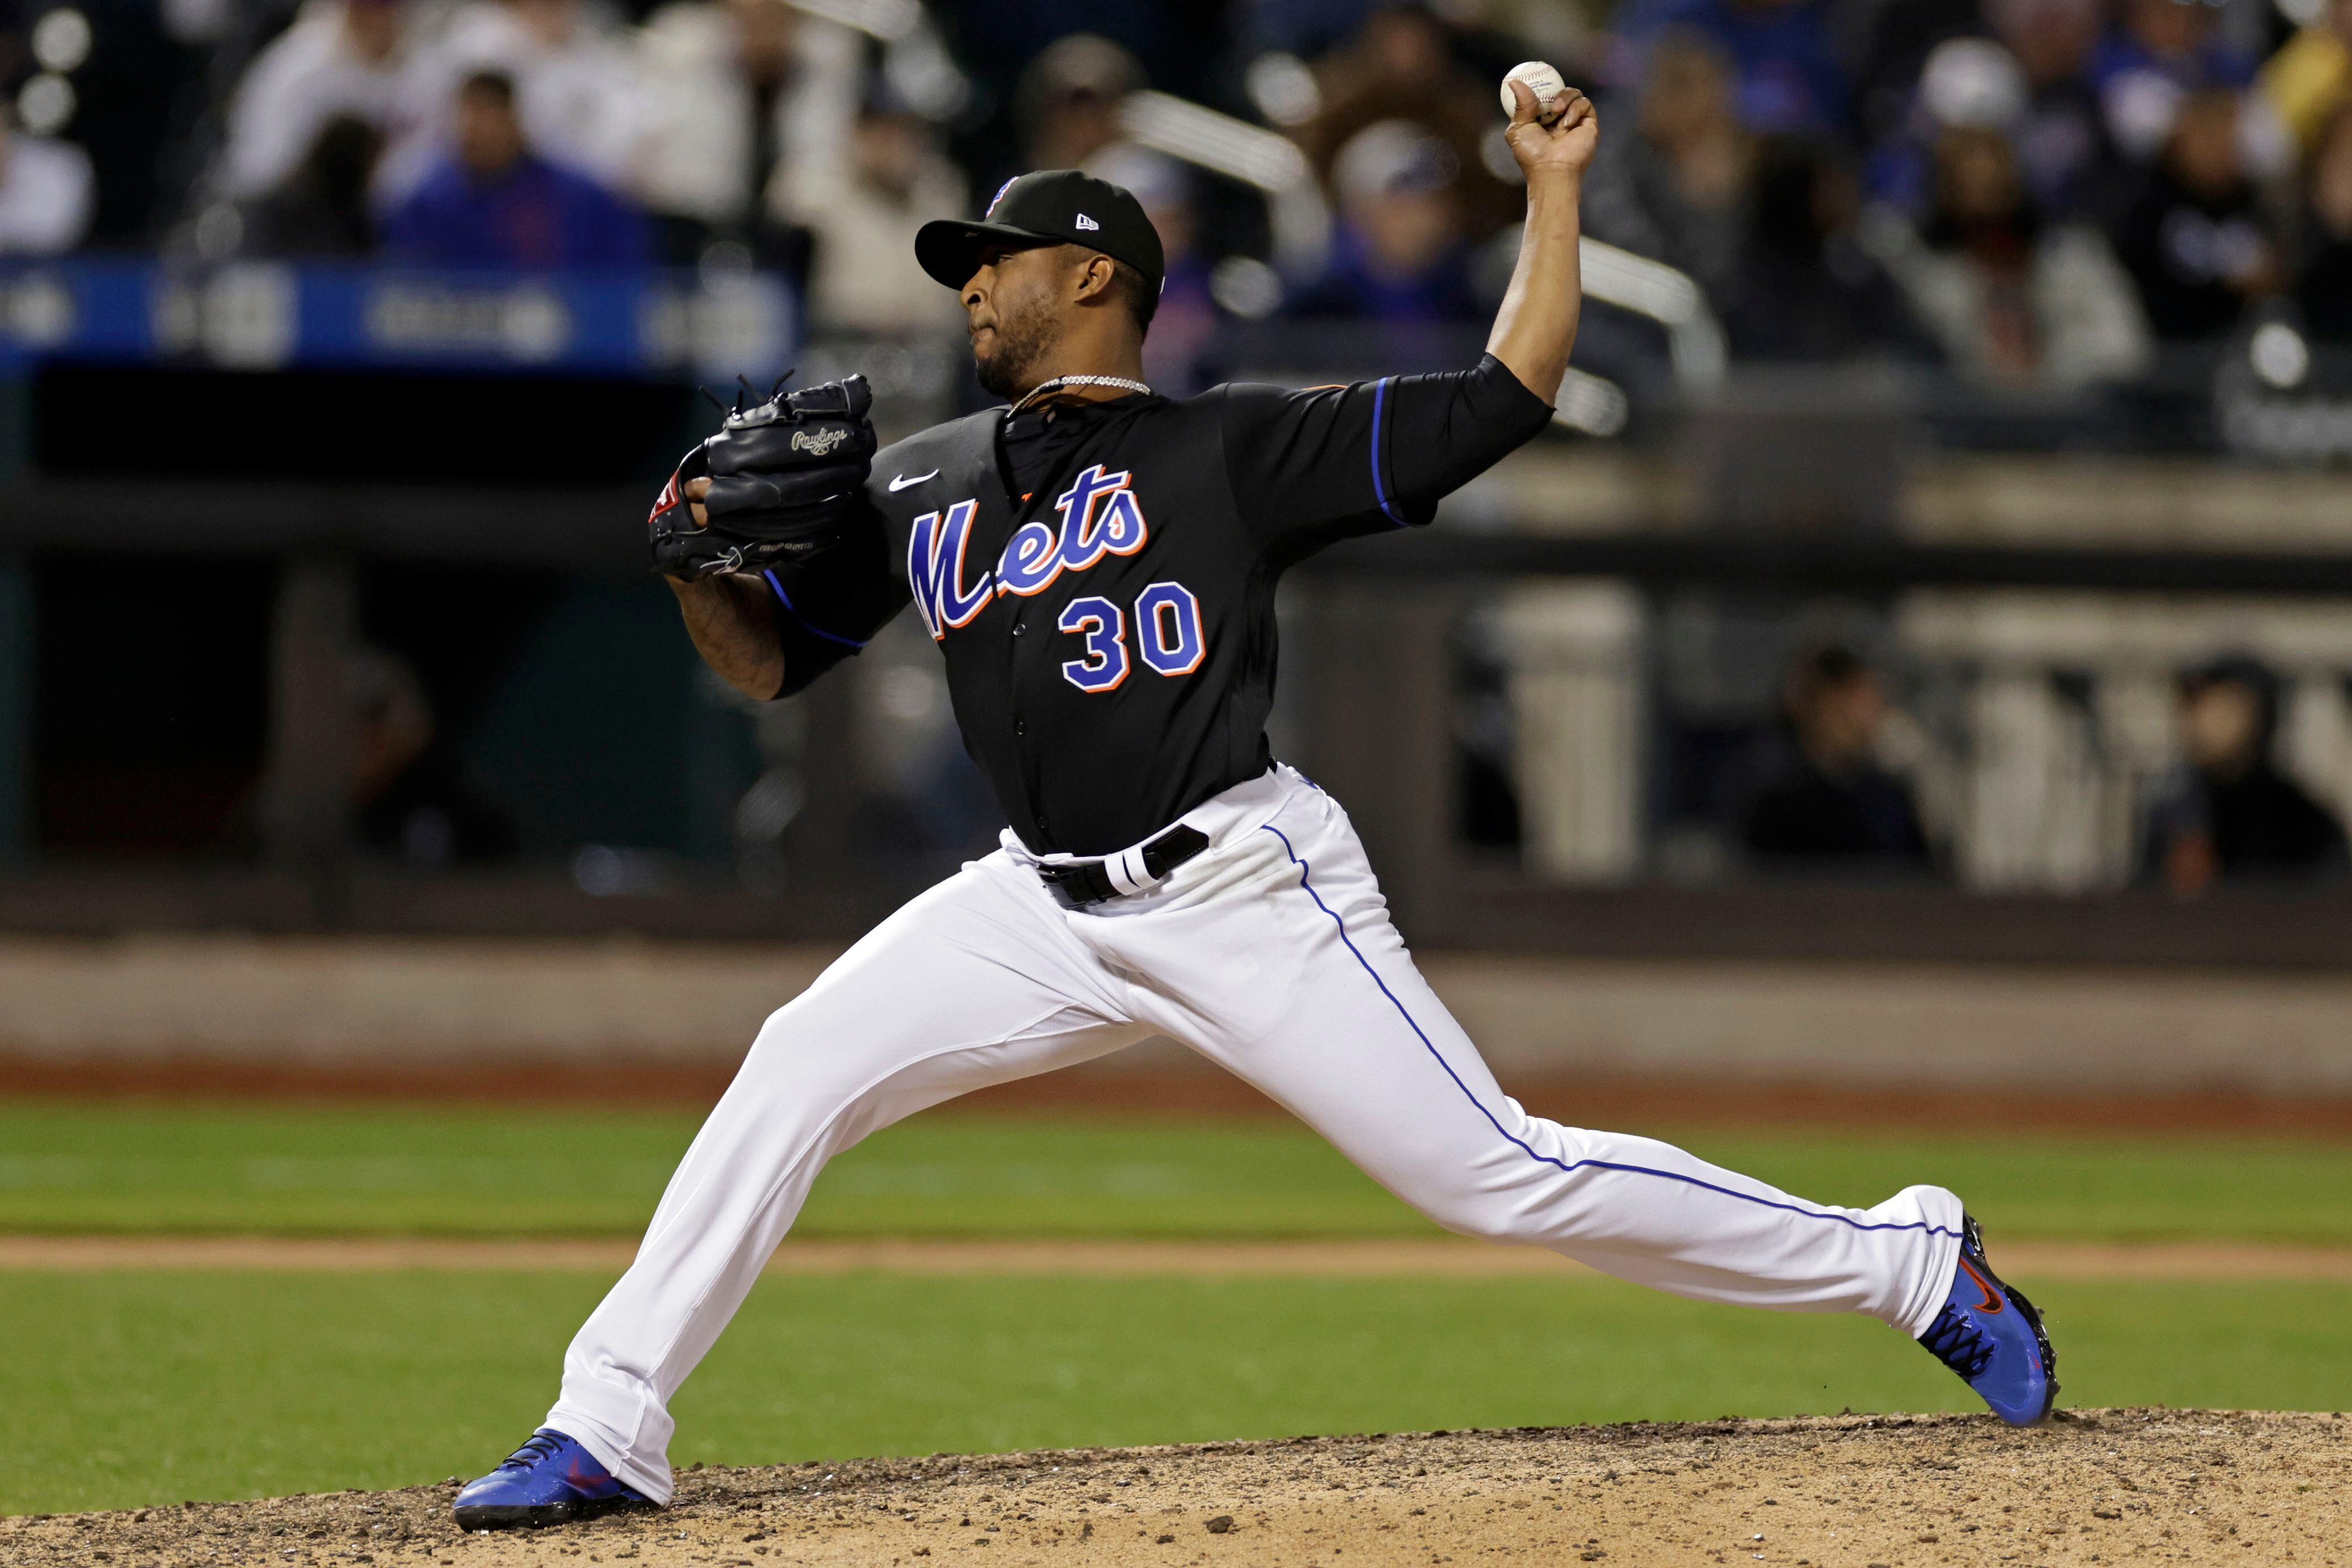 New York Mets relief pitcher Joely Rodriguez (30) pitches in the